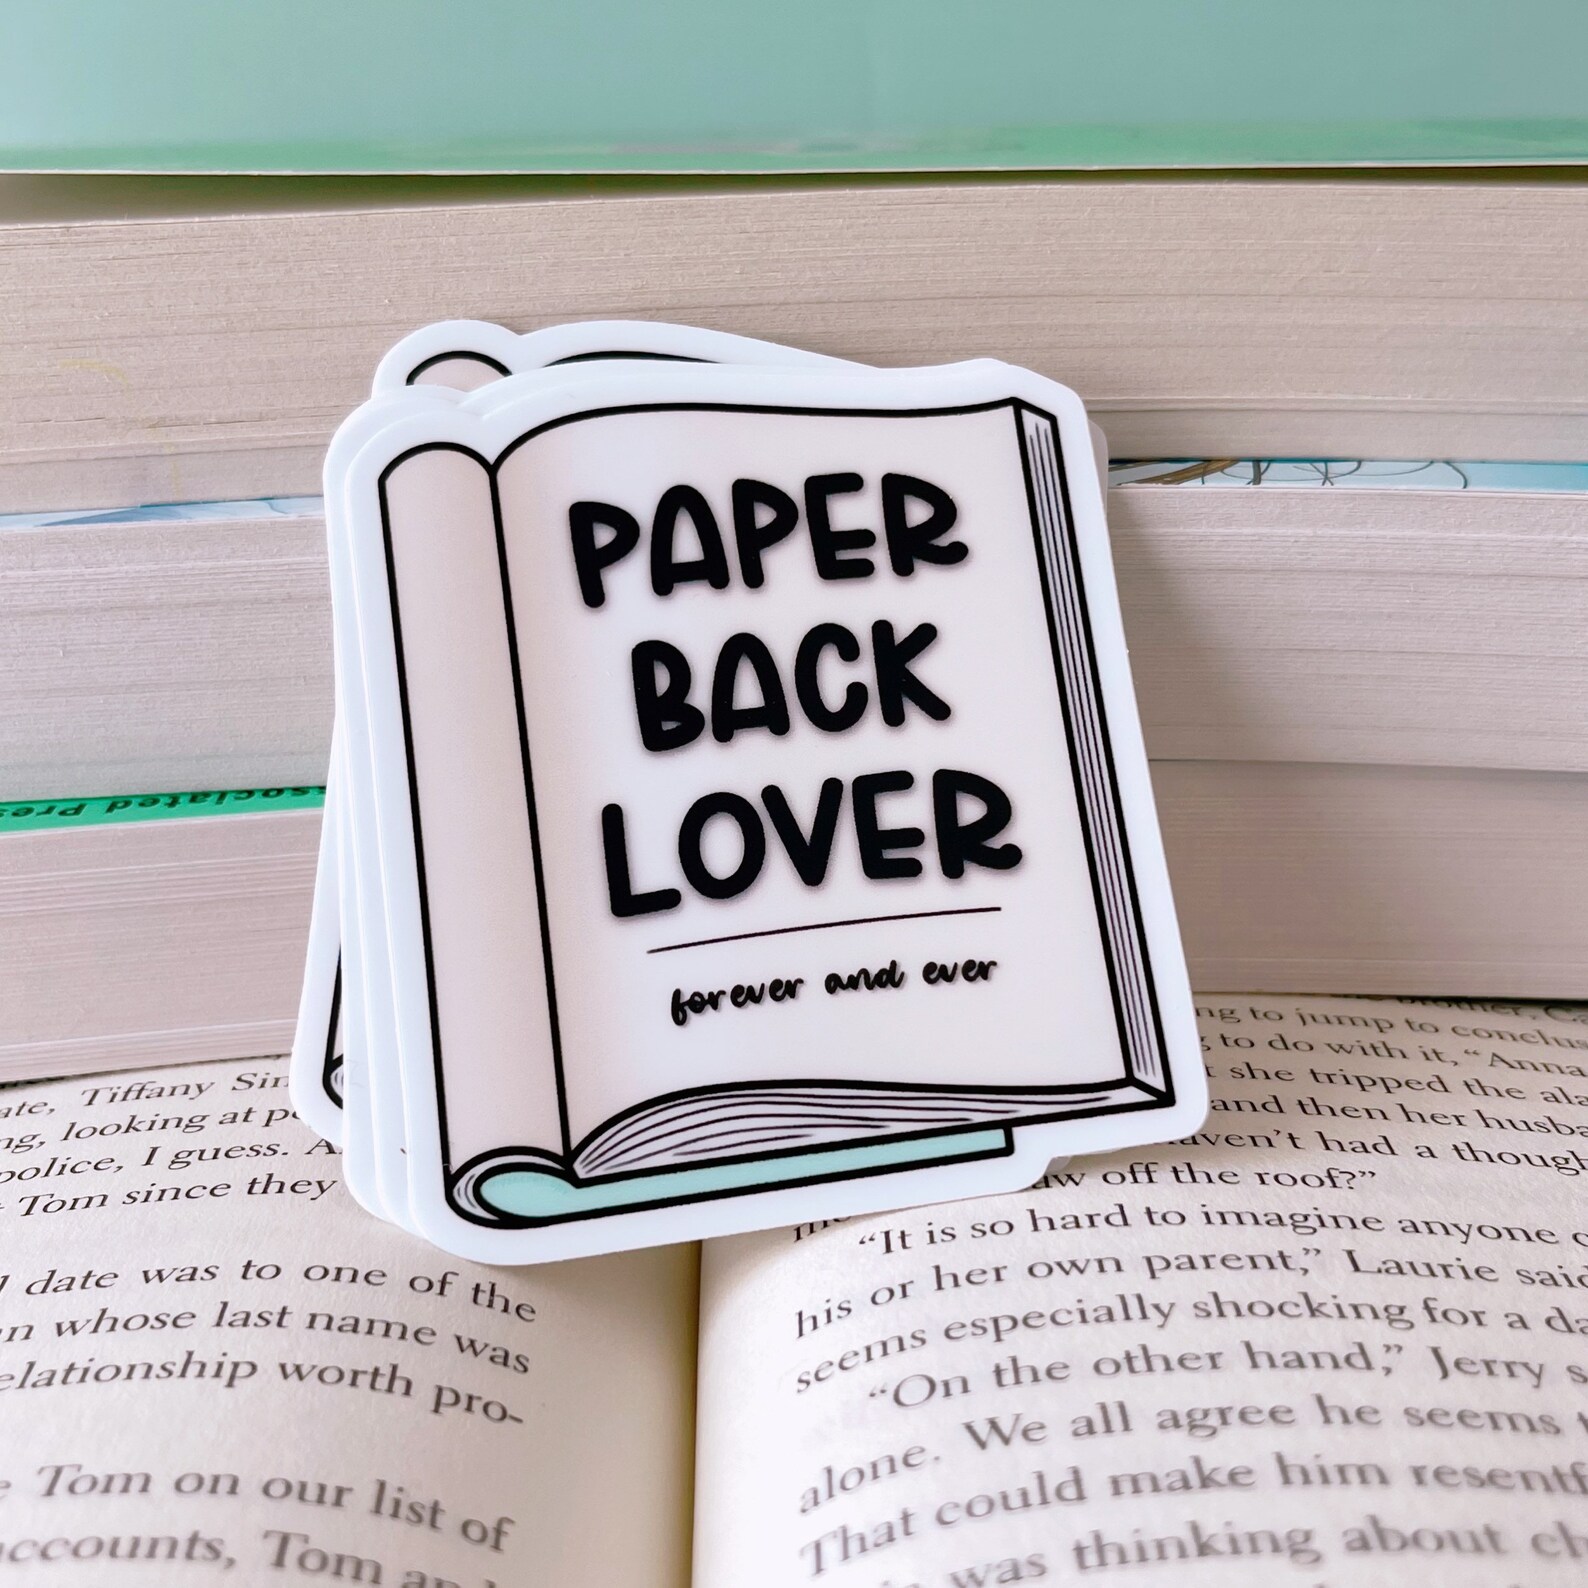 paperback lover sticker in the shape of a book